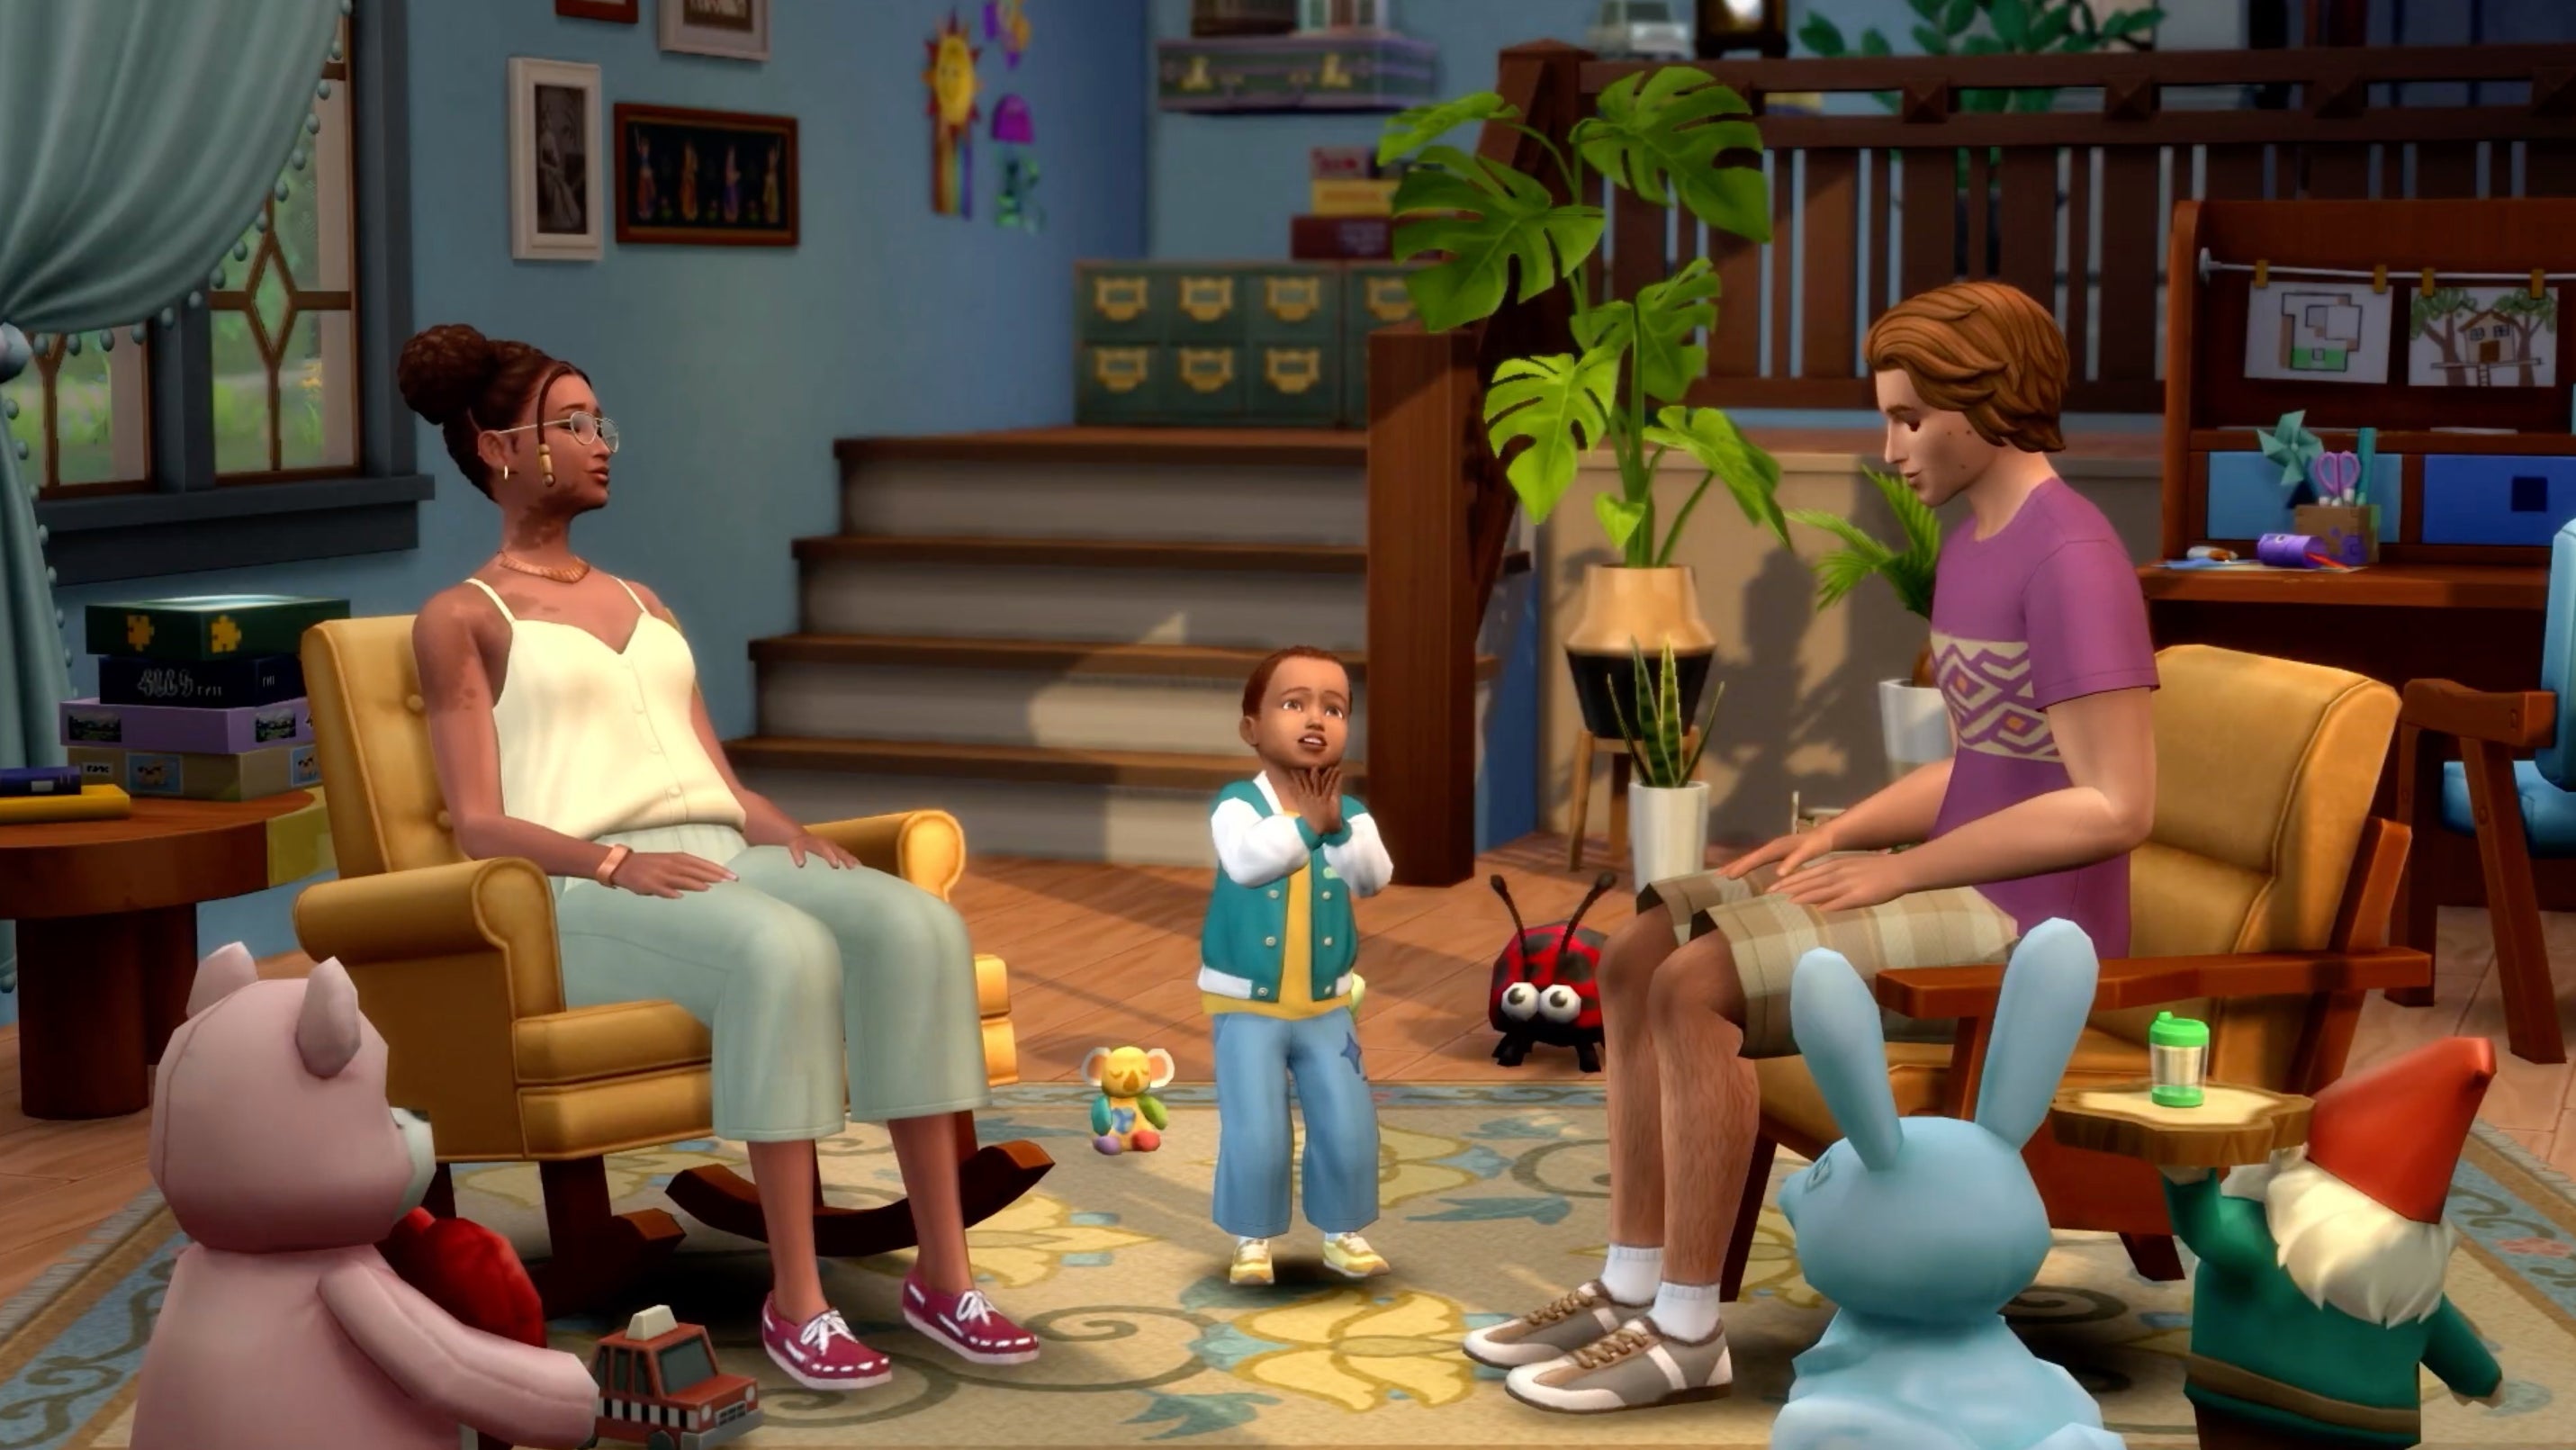 screenshot from sims 4 growing together expansion showing a family with their baby